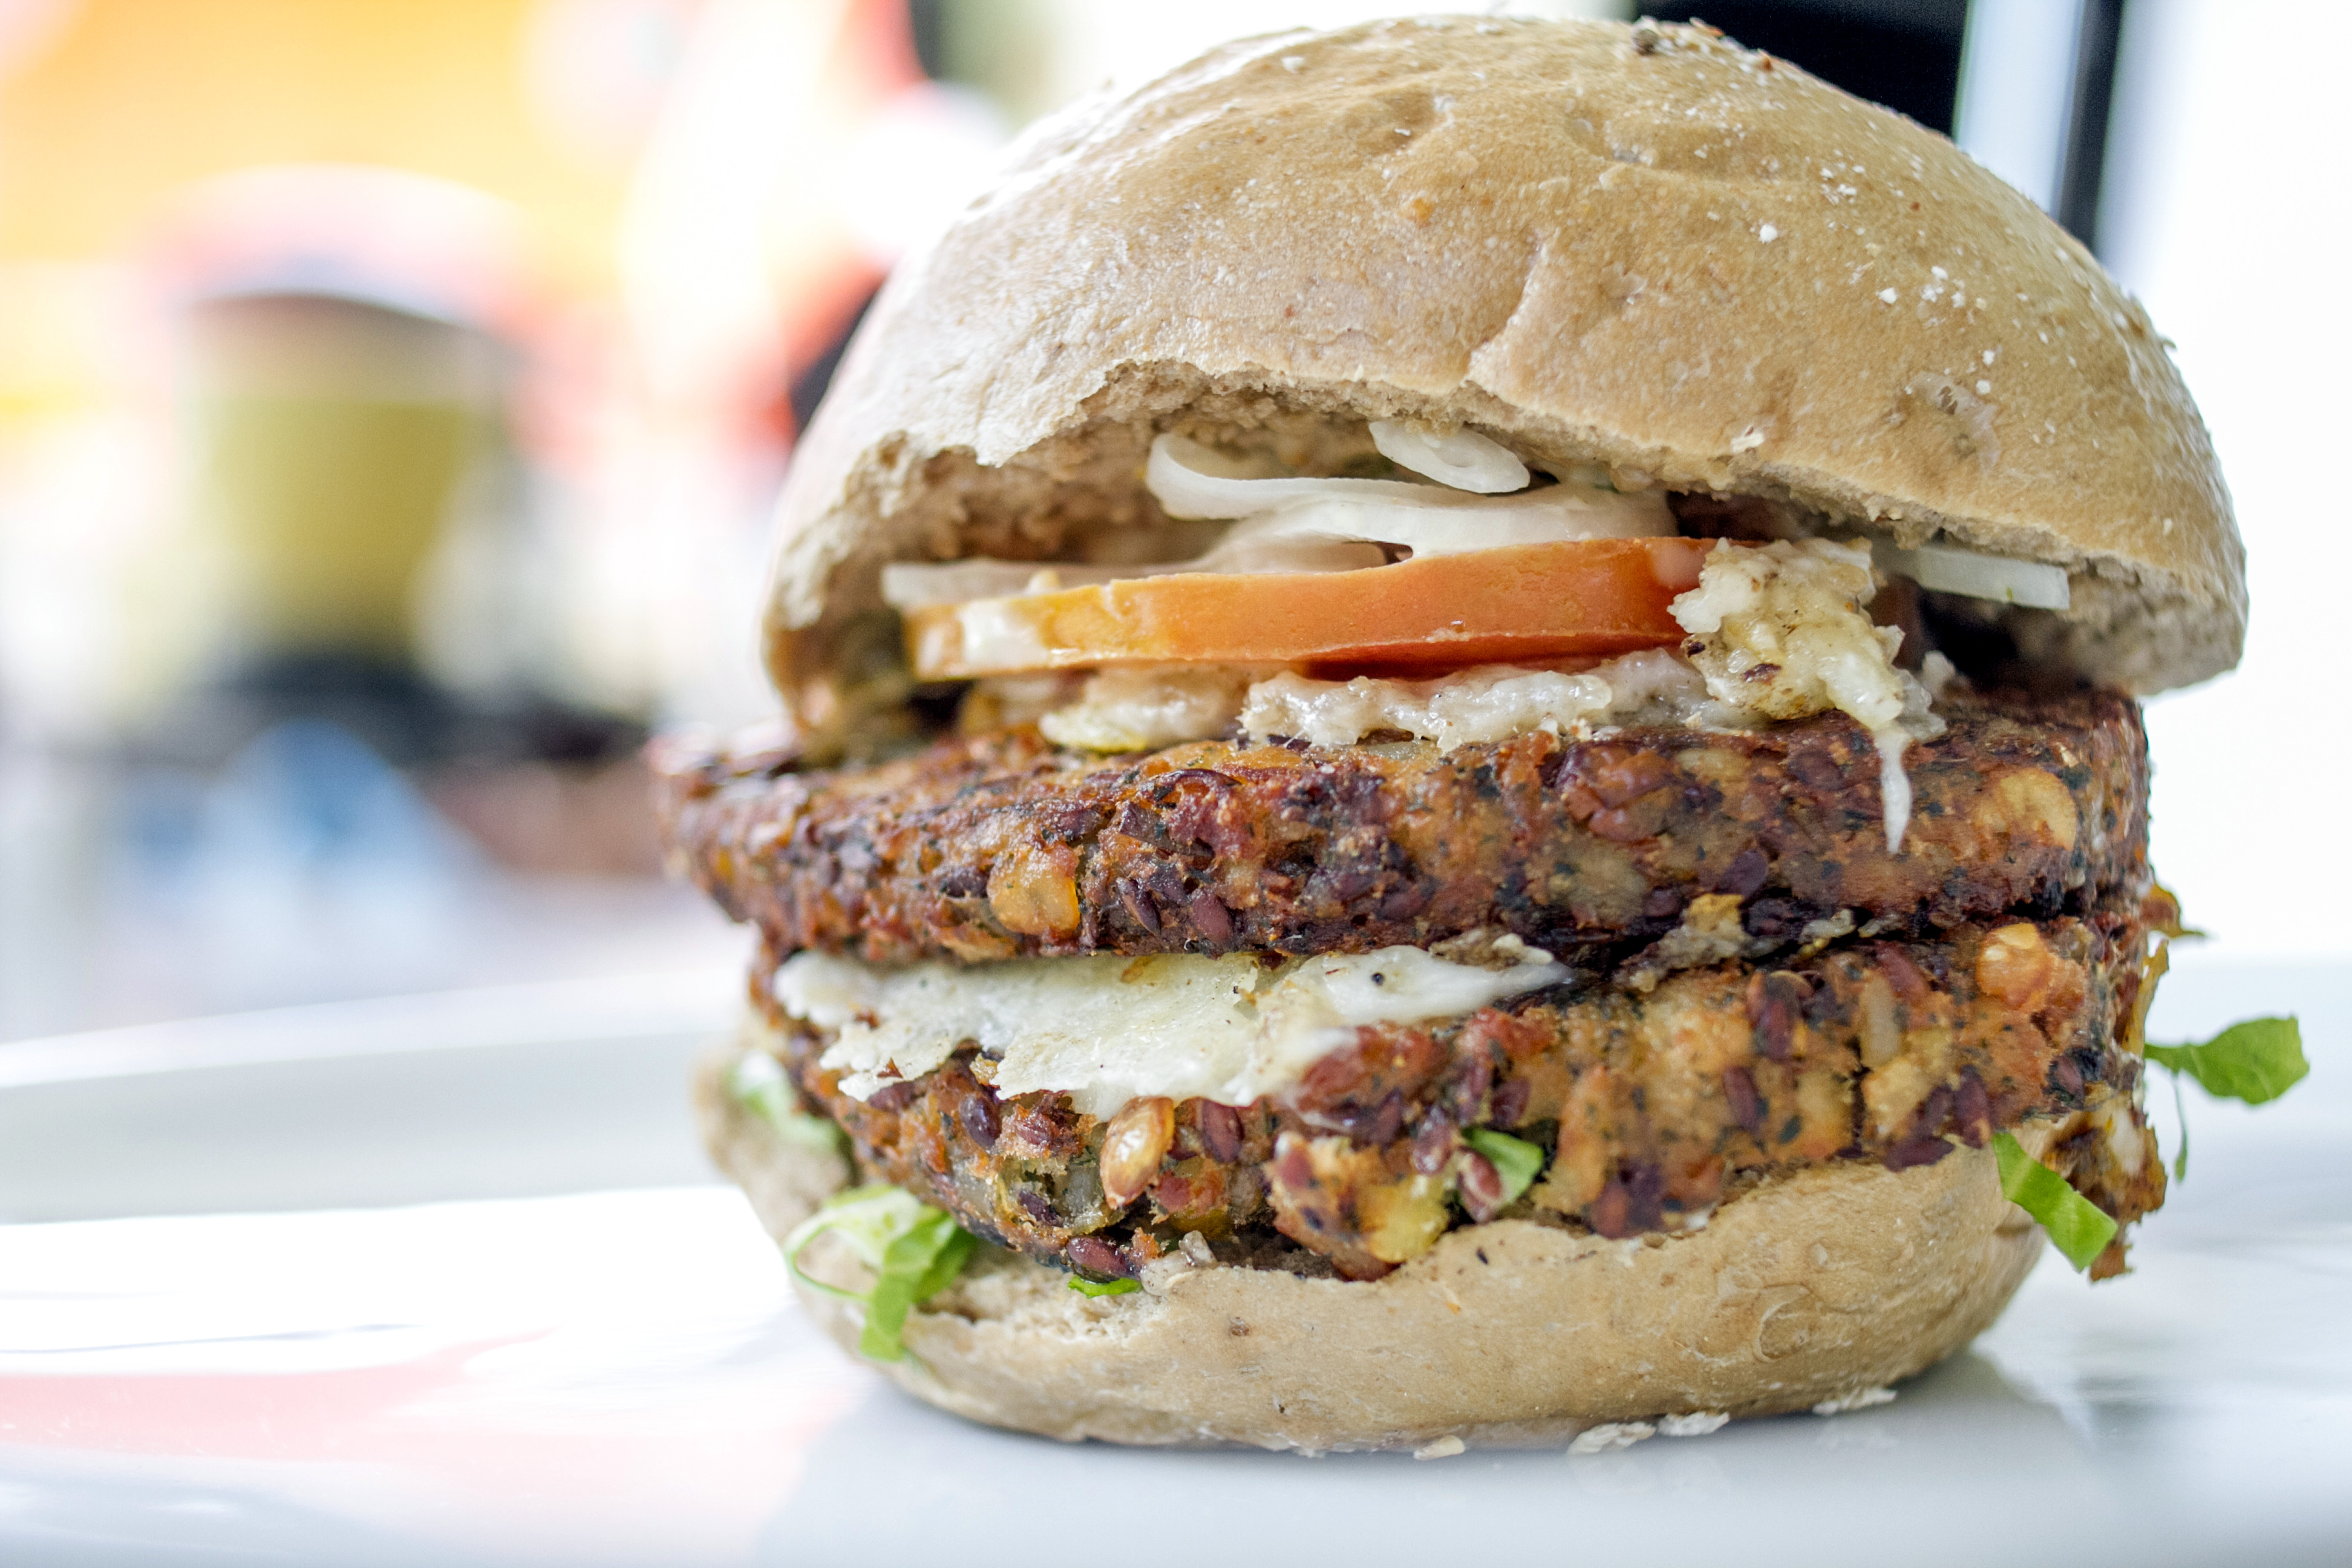 Are plant-based burgers really bad for your heart?